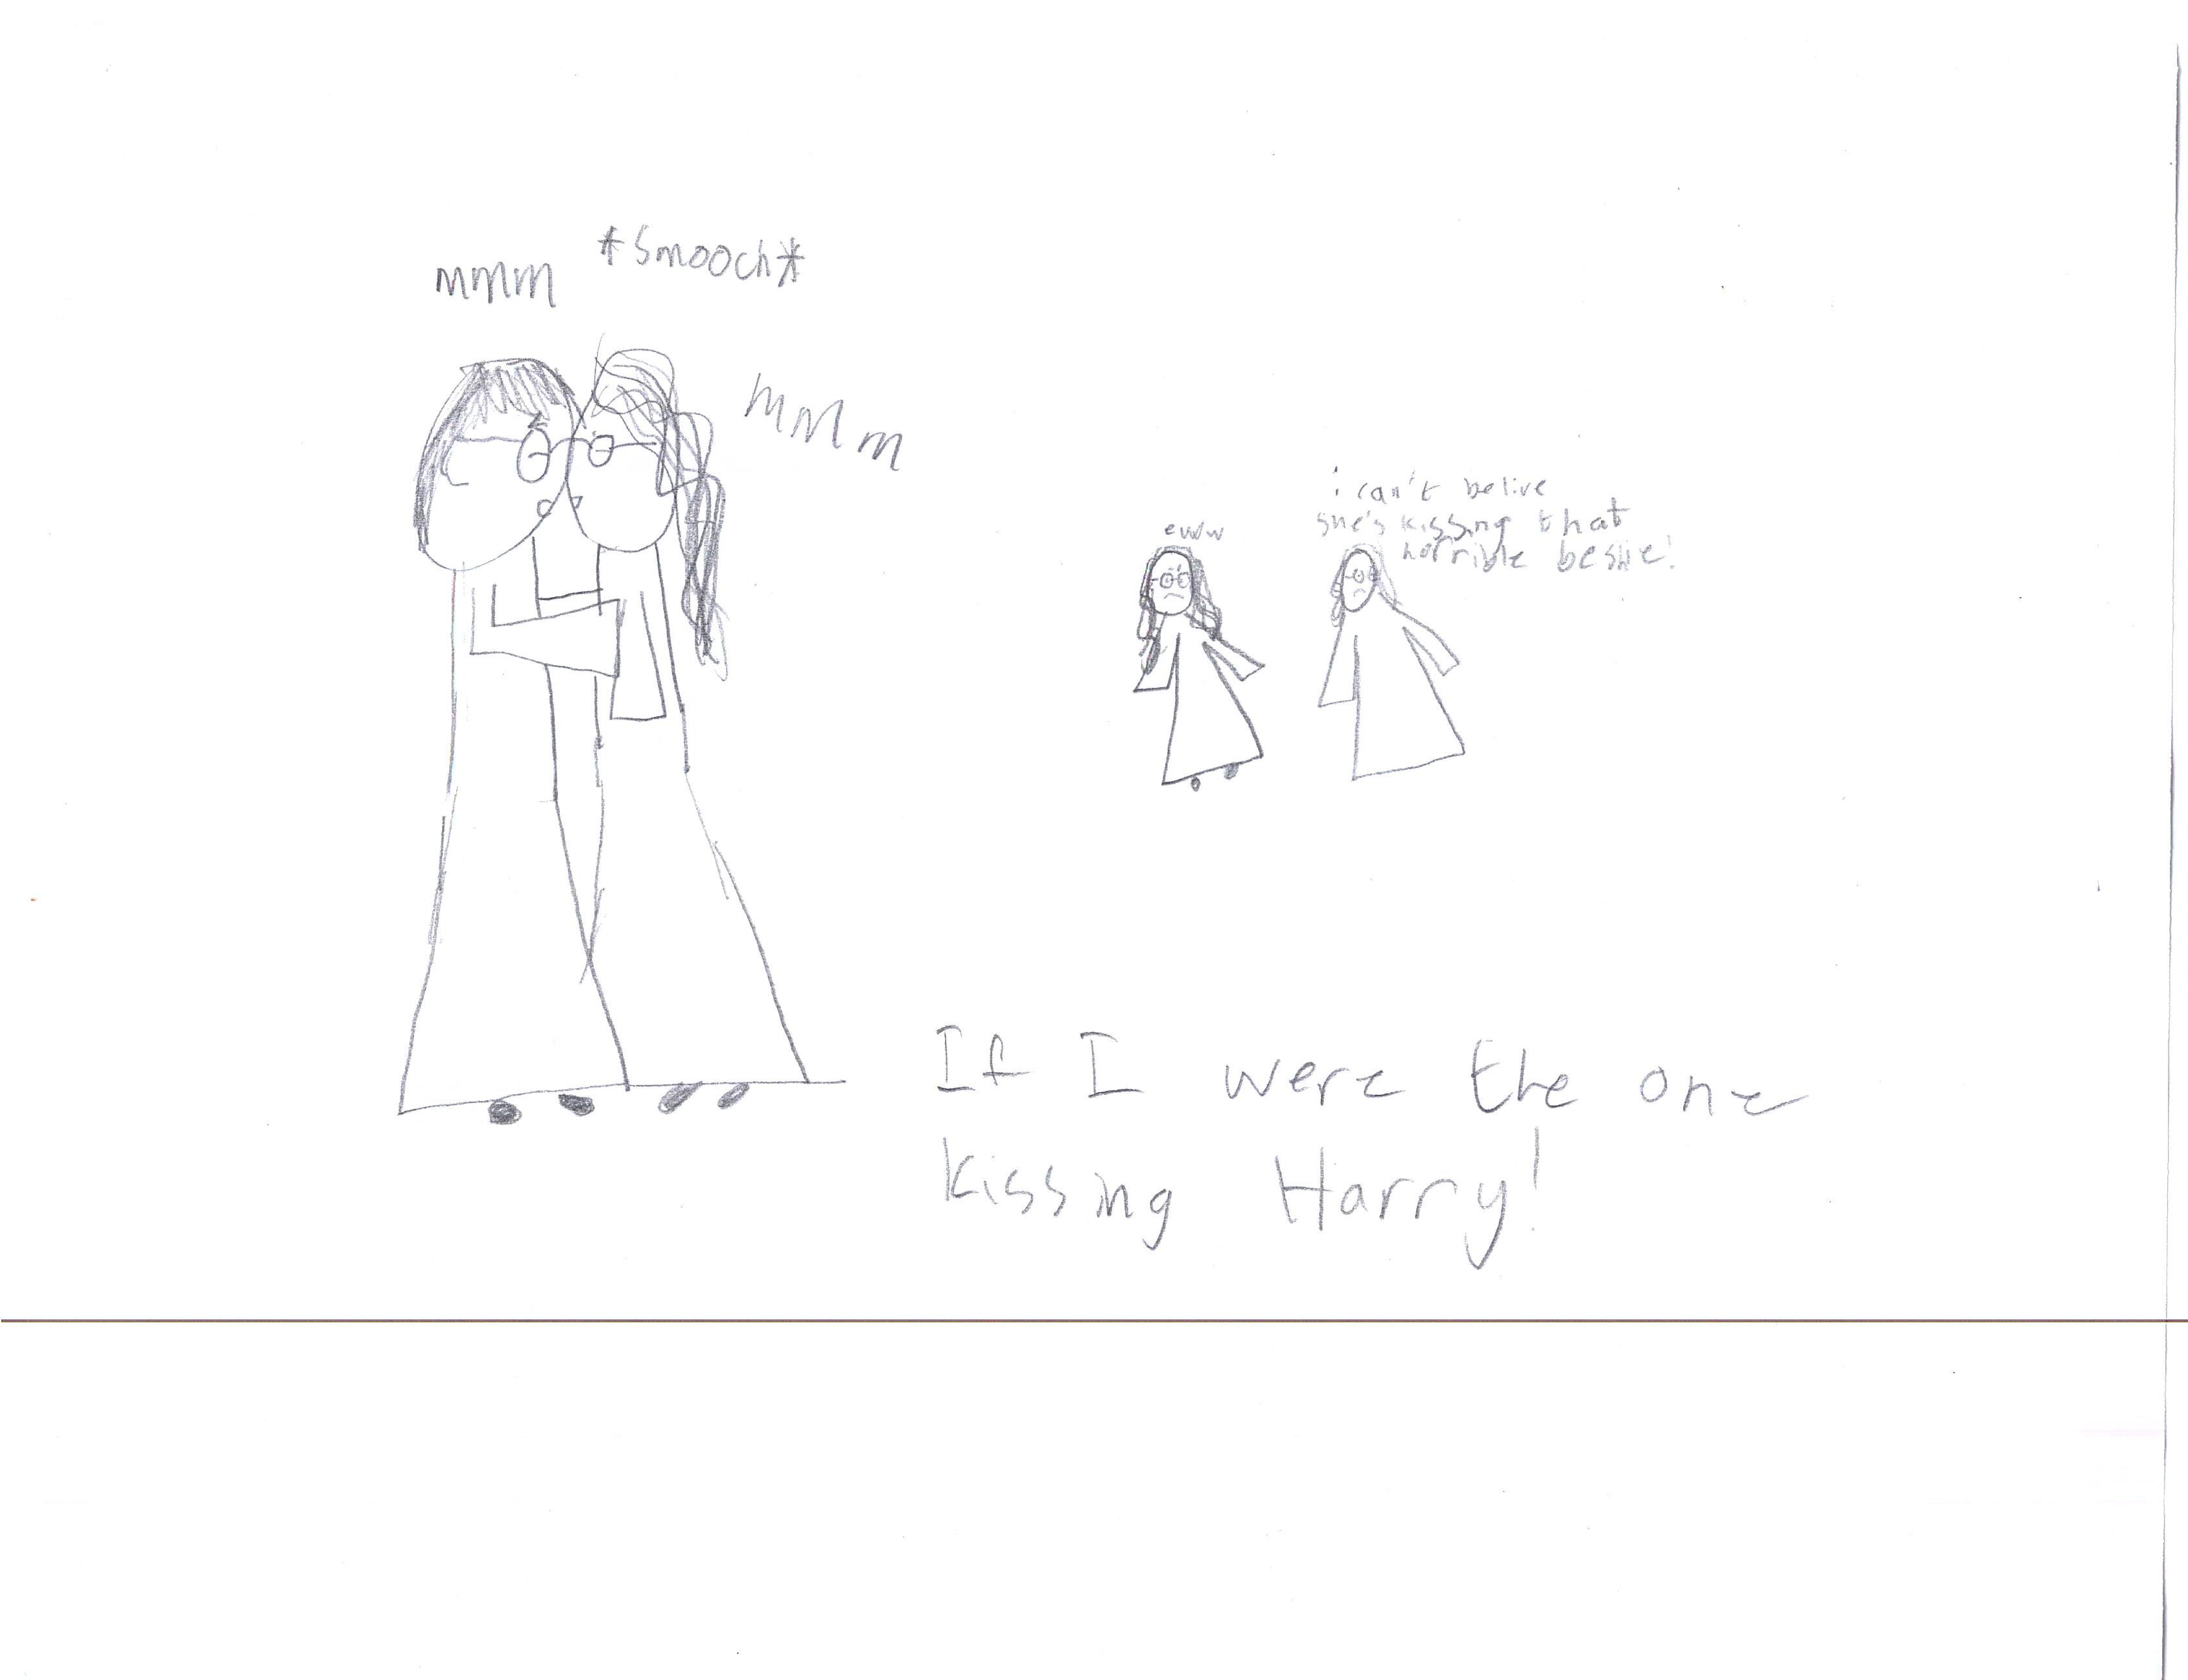 If I Were the One Kissing Harry by horsecrazy555